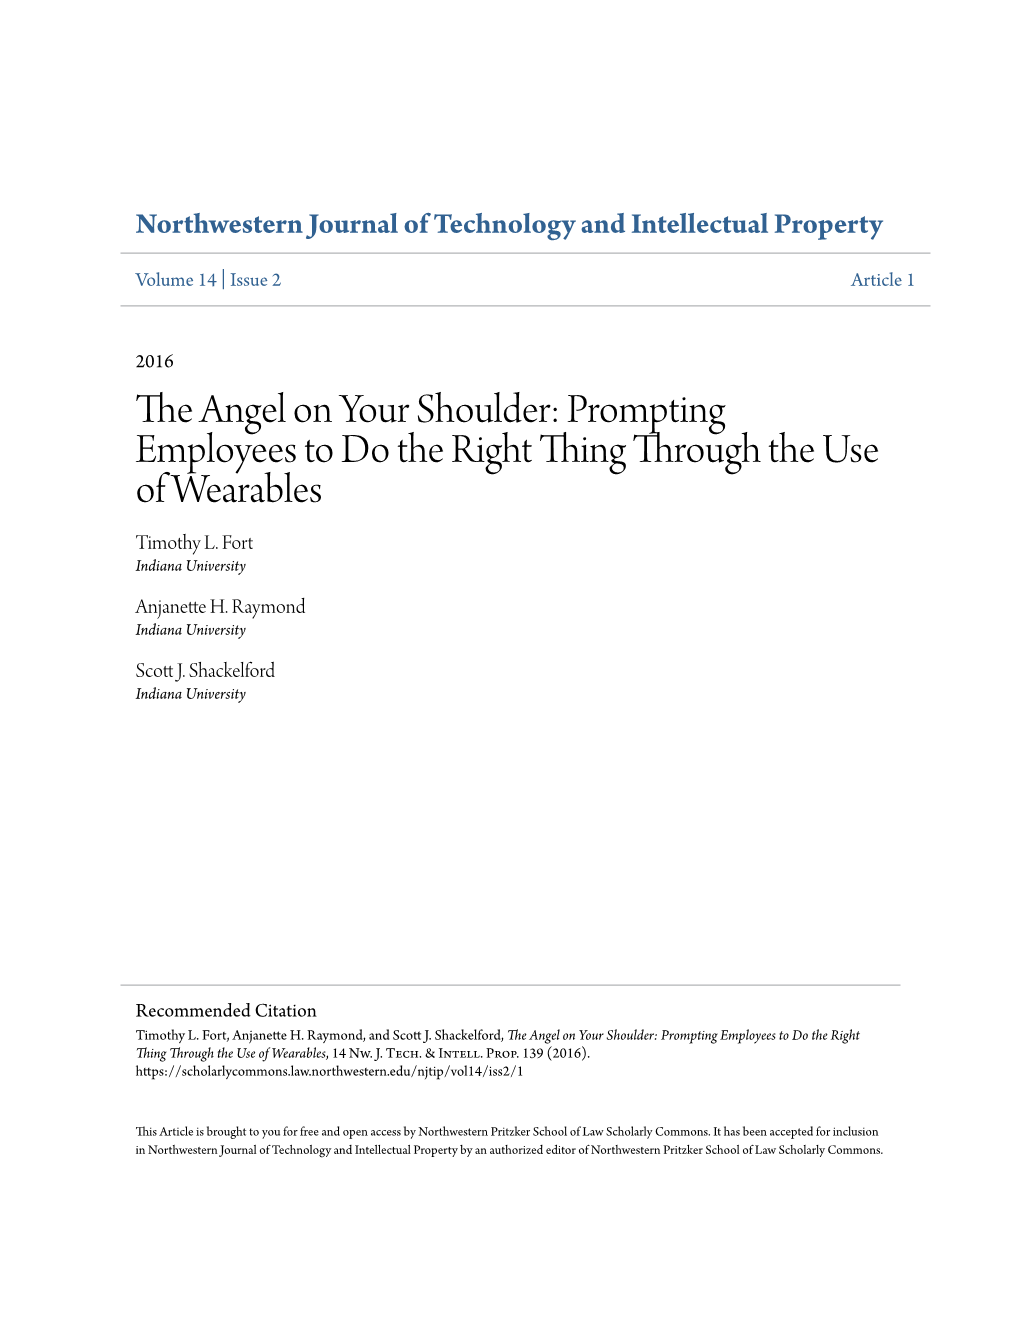 The Angel on Your Shoulder: Prompting Employees to Do the Right Thing Through the Use of Wearables Timothy L